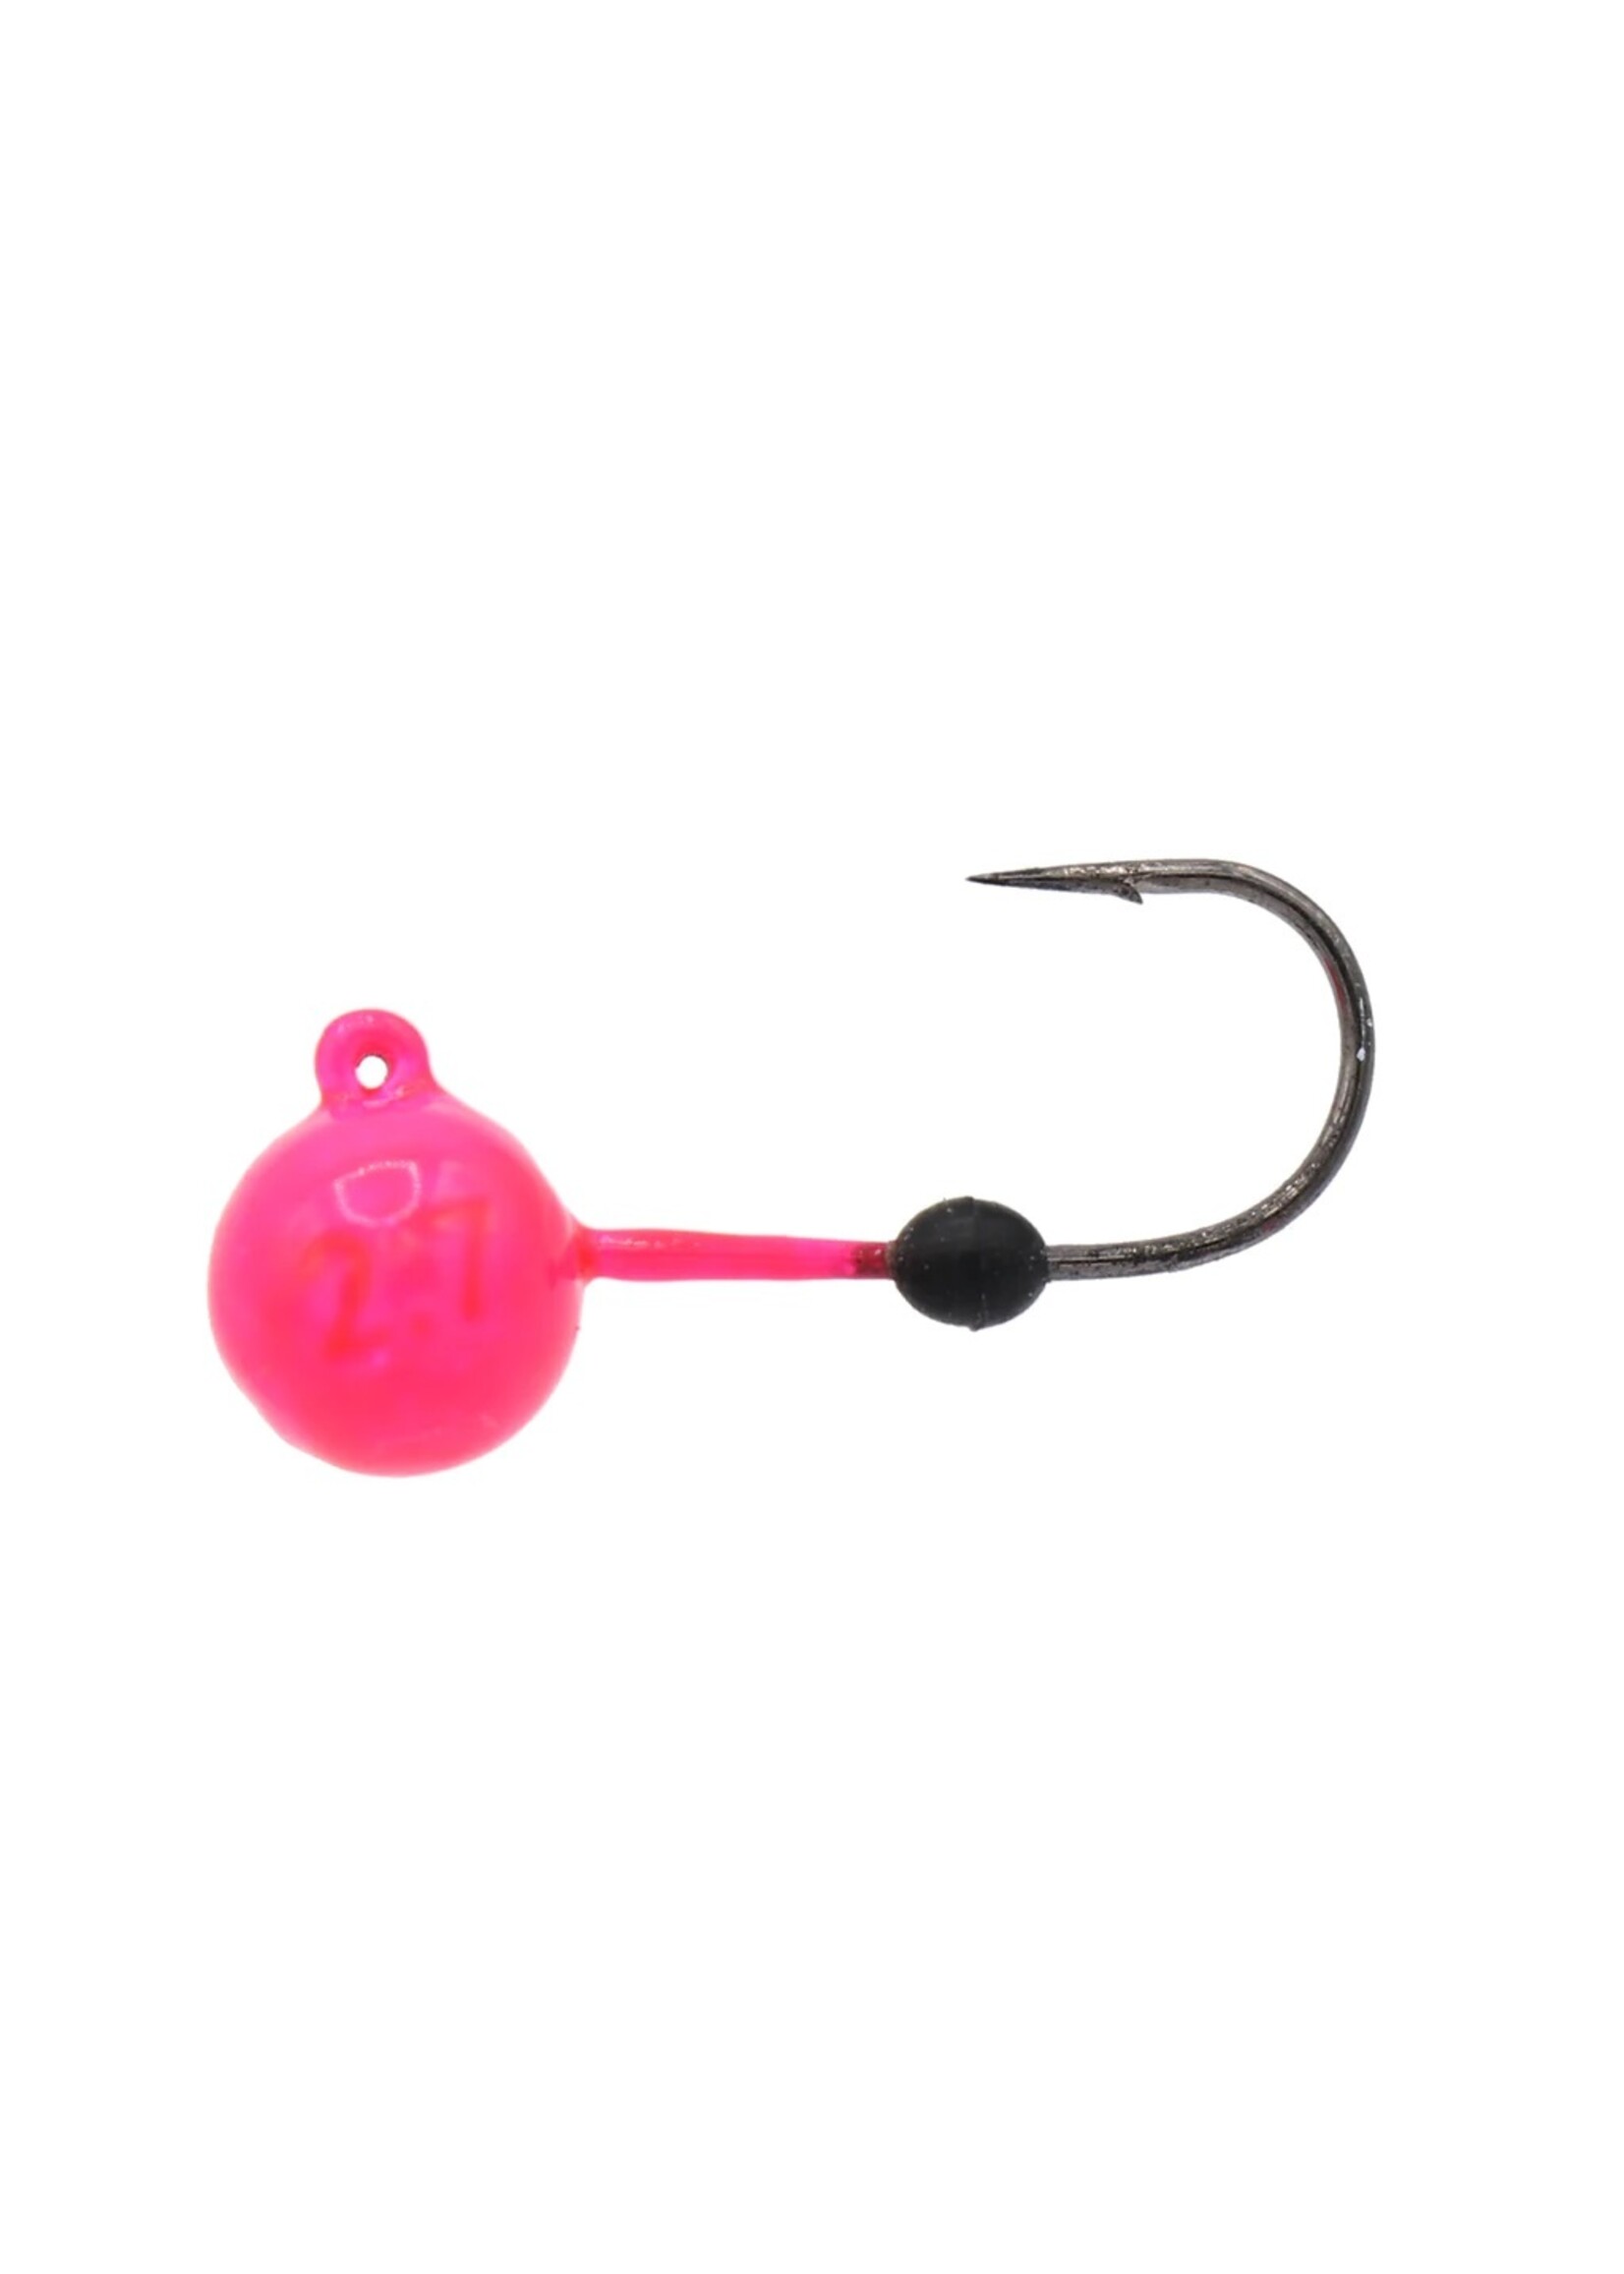 Eurotackle Eurotackle Micro Finesse Tungsten Soft-Lock Jig Heads